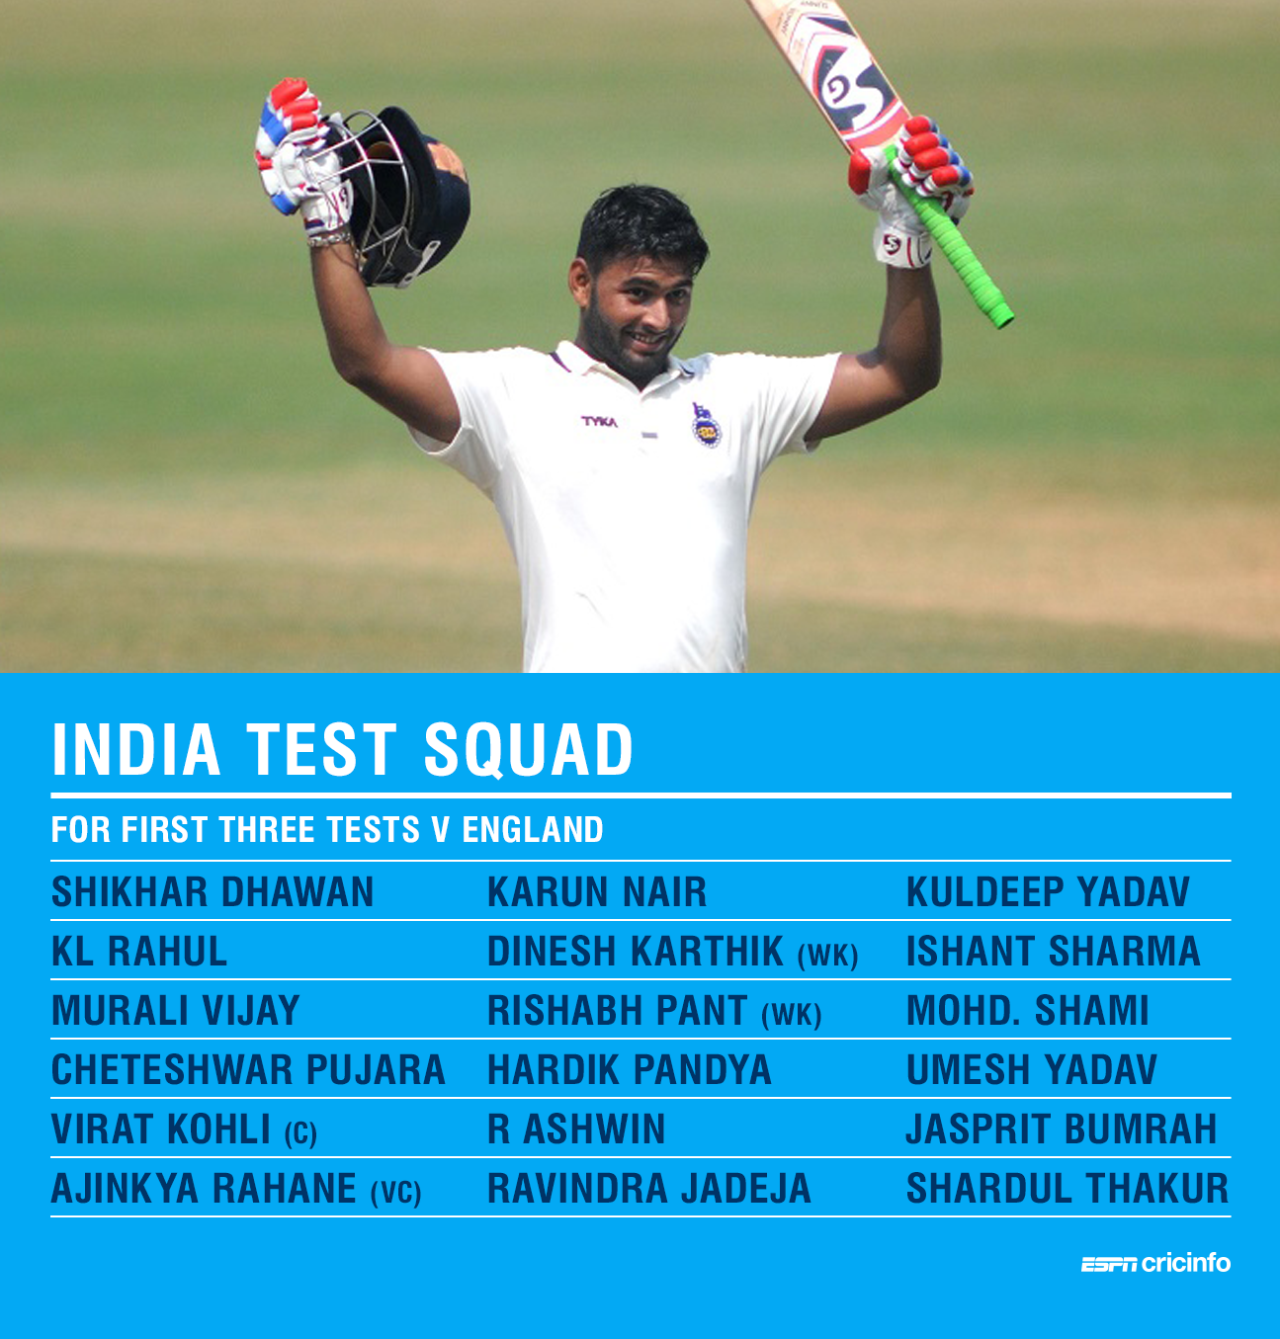 India's Test squad for their tour of England